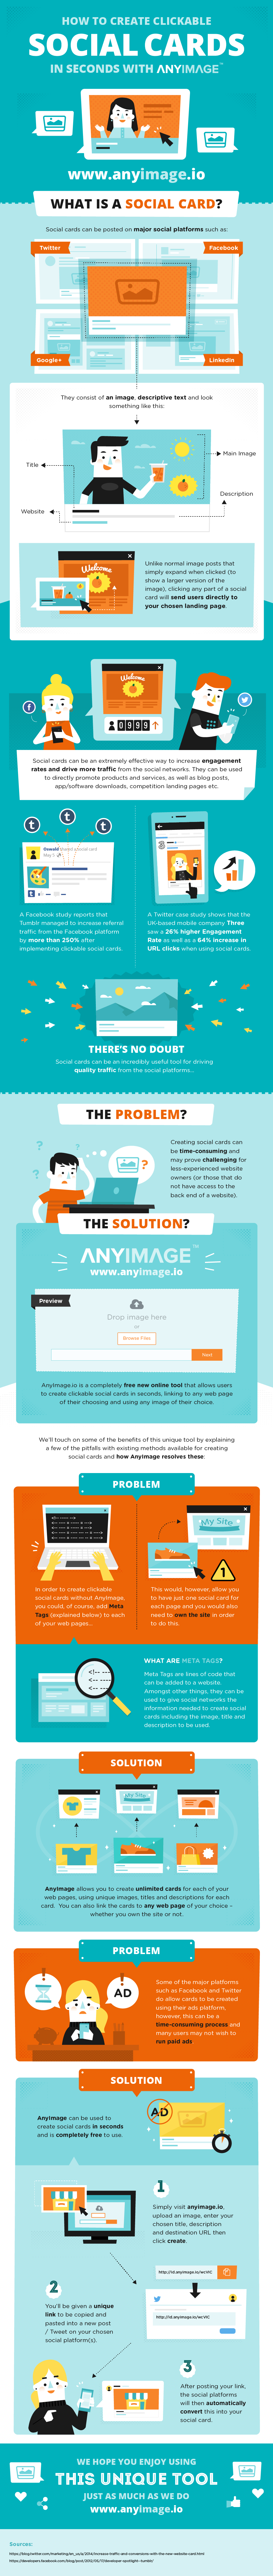 Clickable Social Cards InfoGraphic